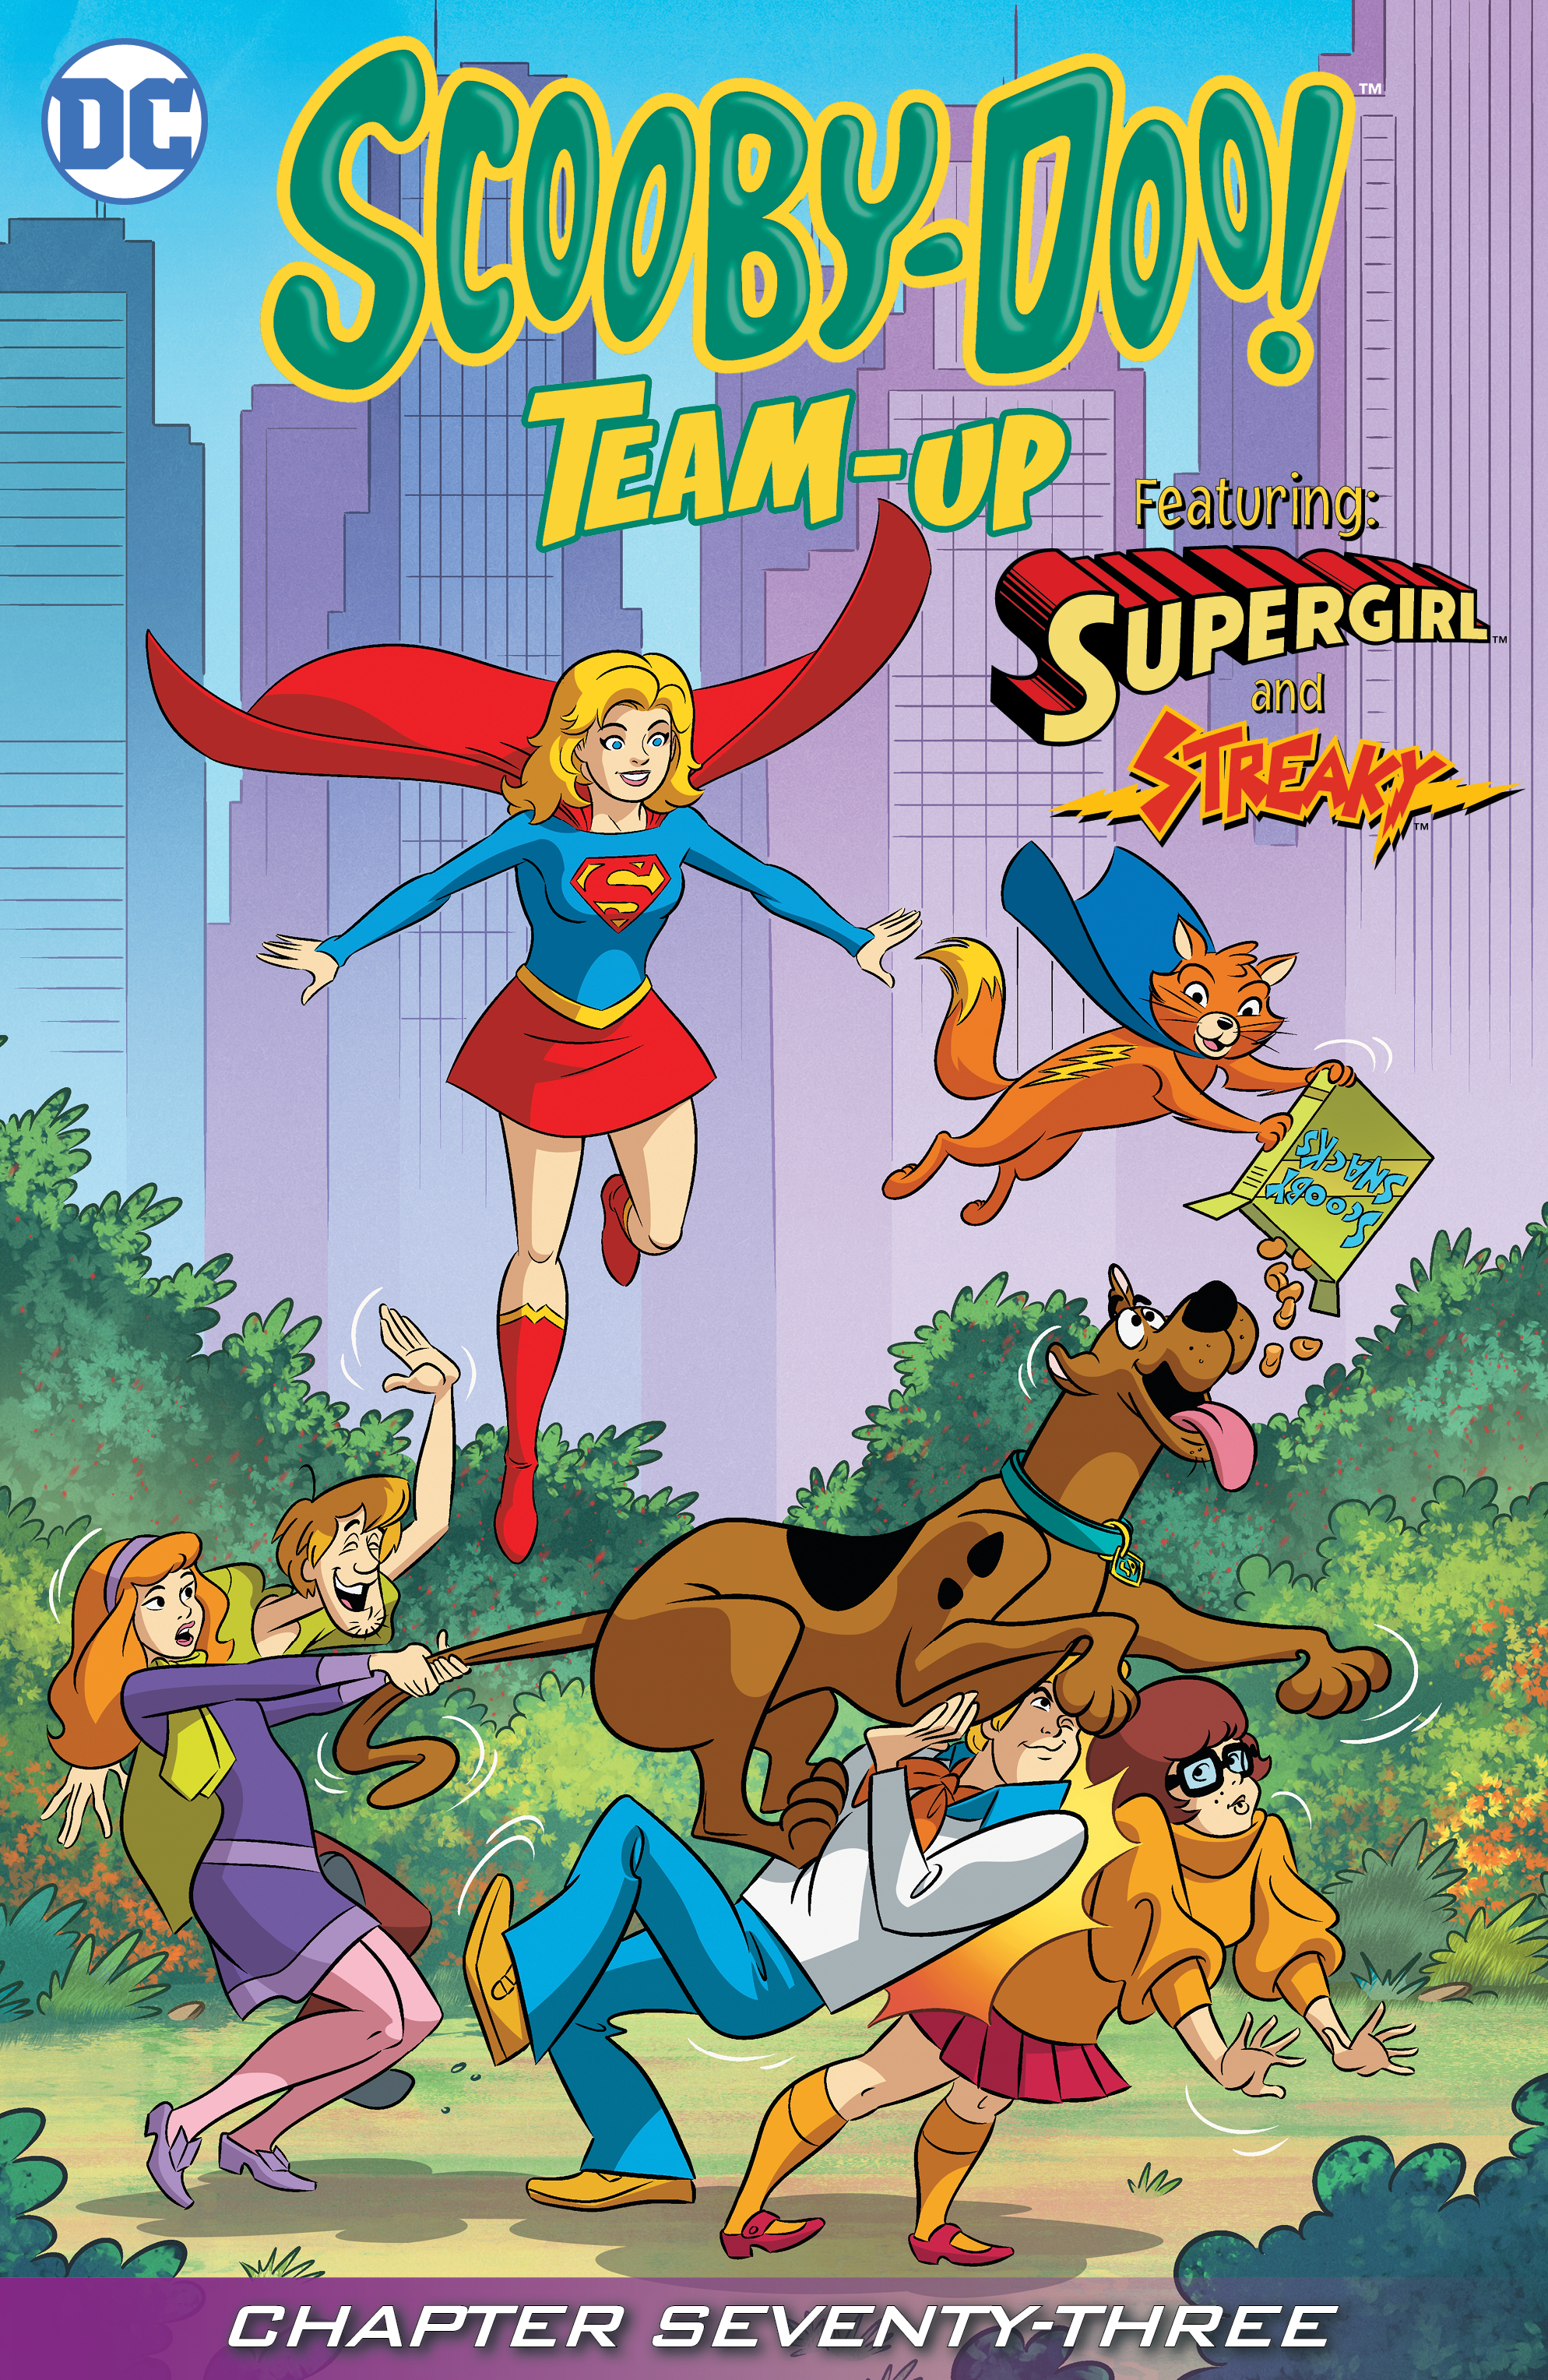 Scooby-Doo Team-Up #73 preview images